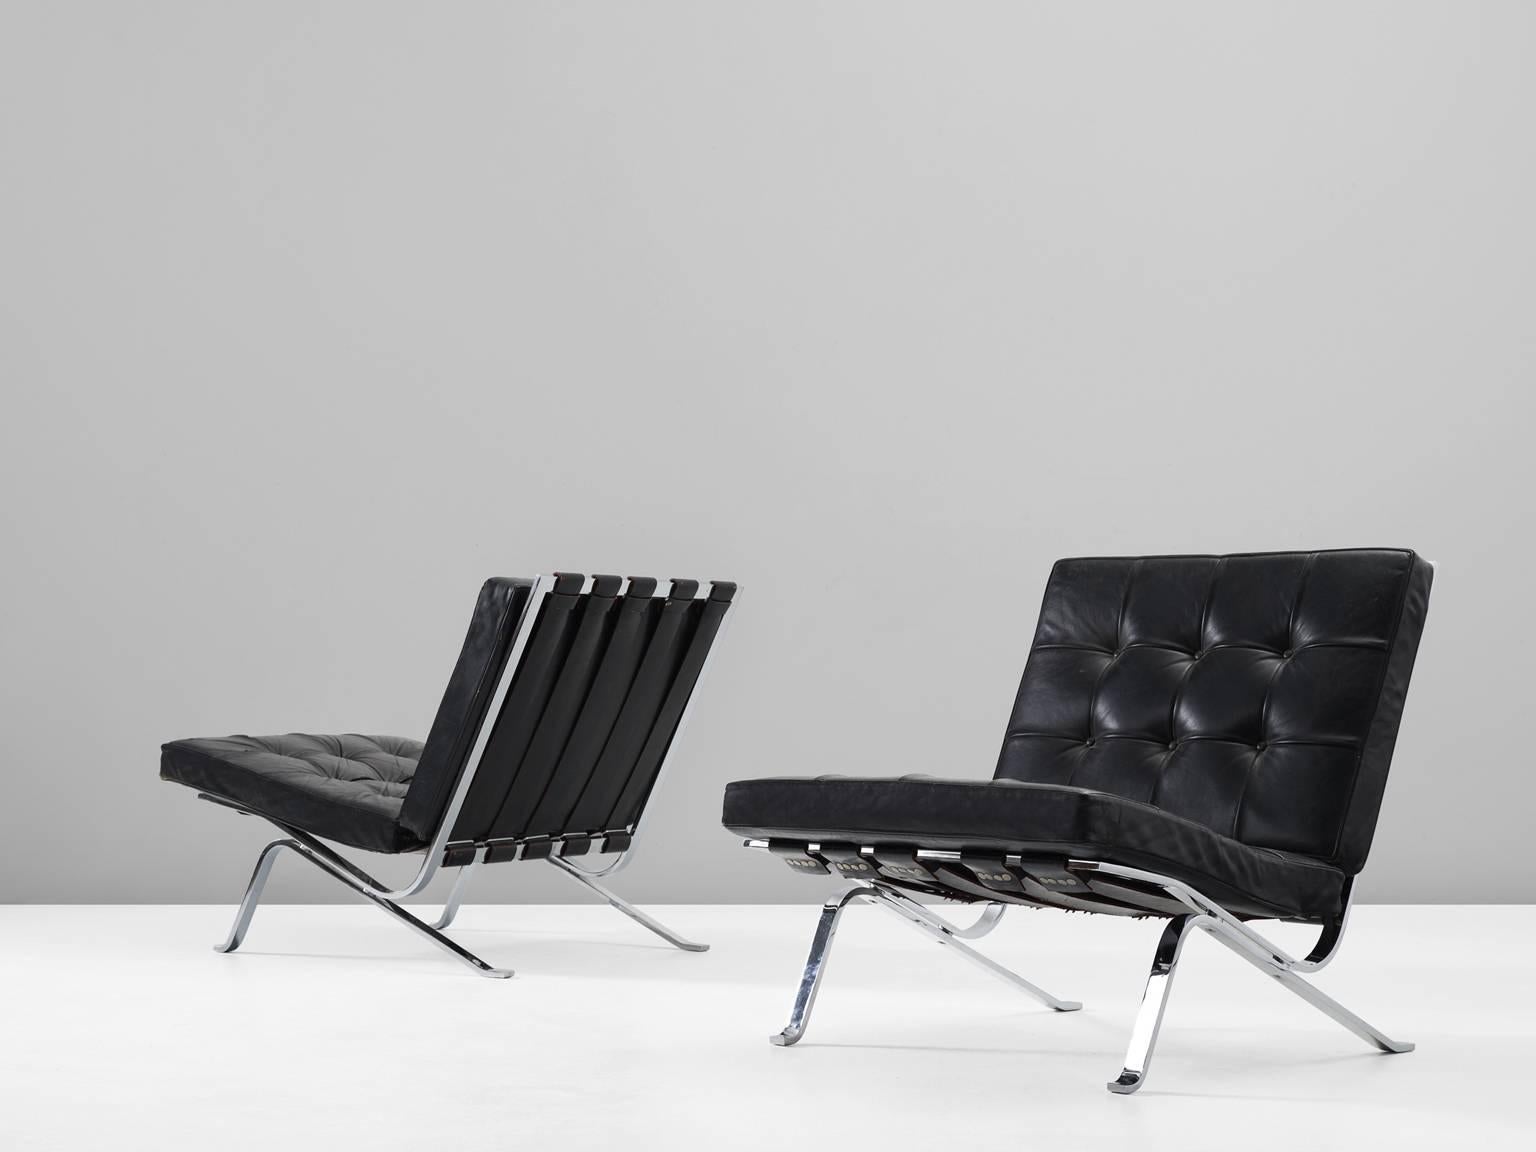 Set of two easy chairs model RH301, in chromed metal and black leather, by Robert Haussmann, Switzerland 1950s. 

A pair of 2 rare and early chairs by Swiss born architect Robert Haussmann. This chair was an homage by Haussmann to his idol and